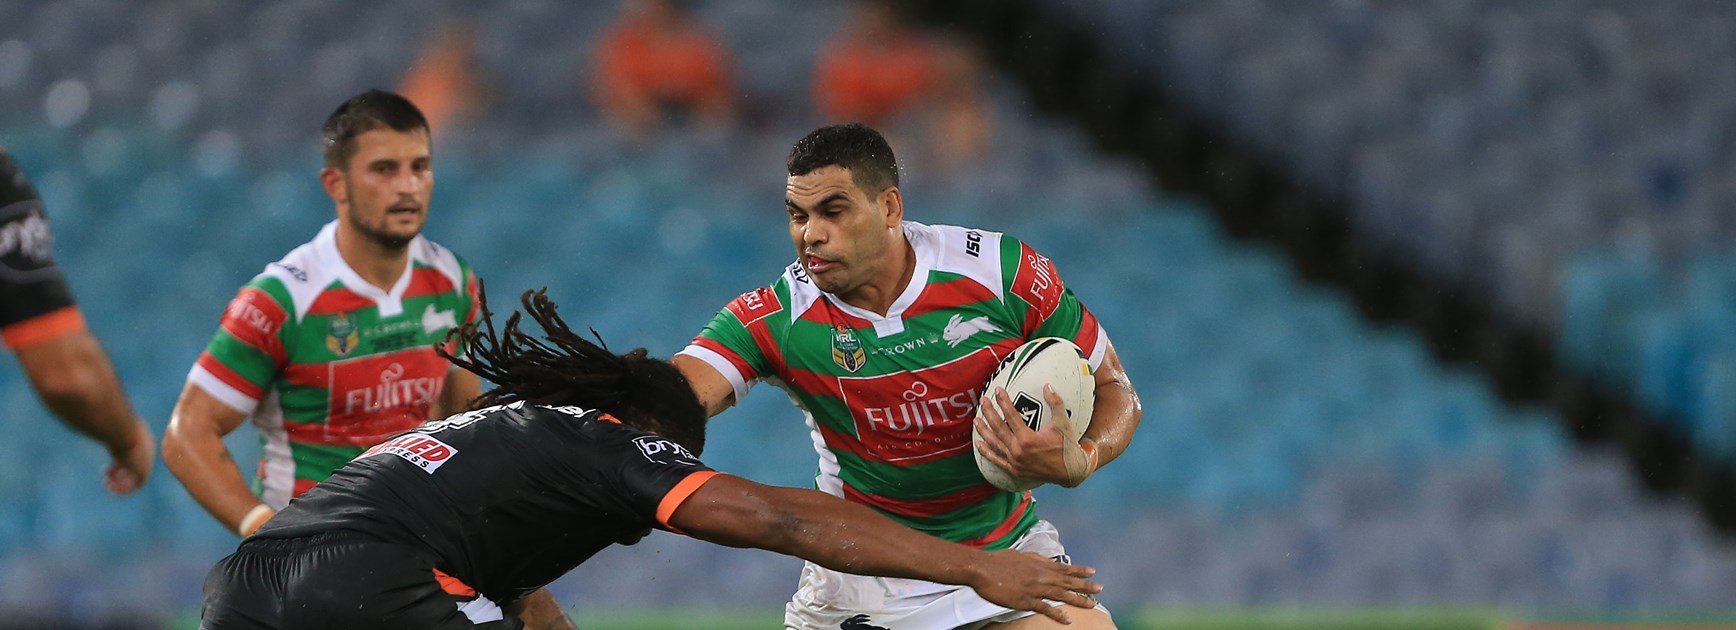 Inglis to make call on return date and fullback role